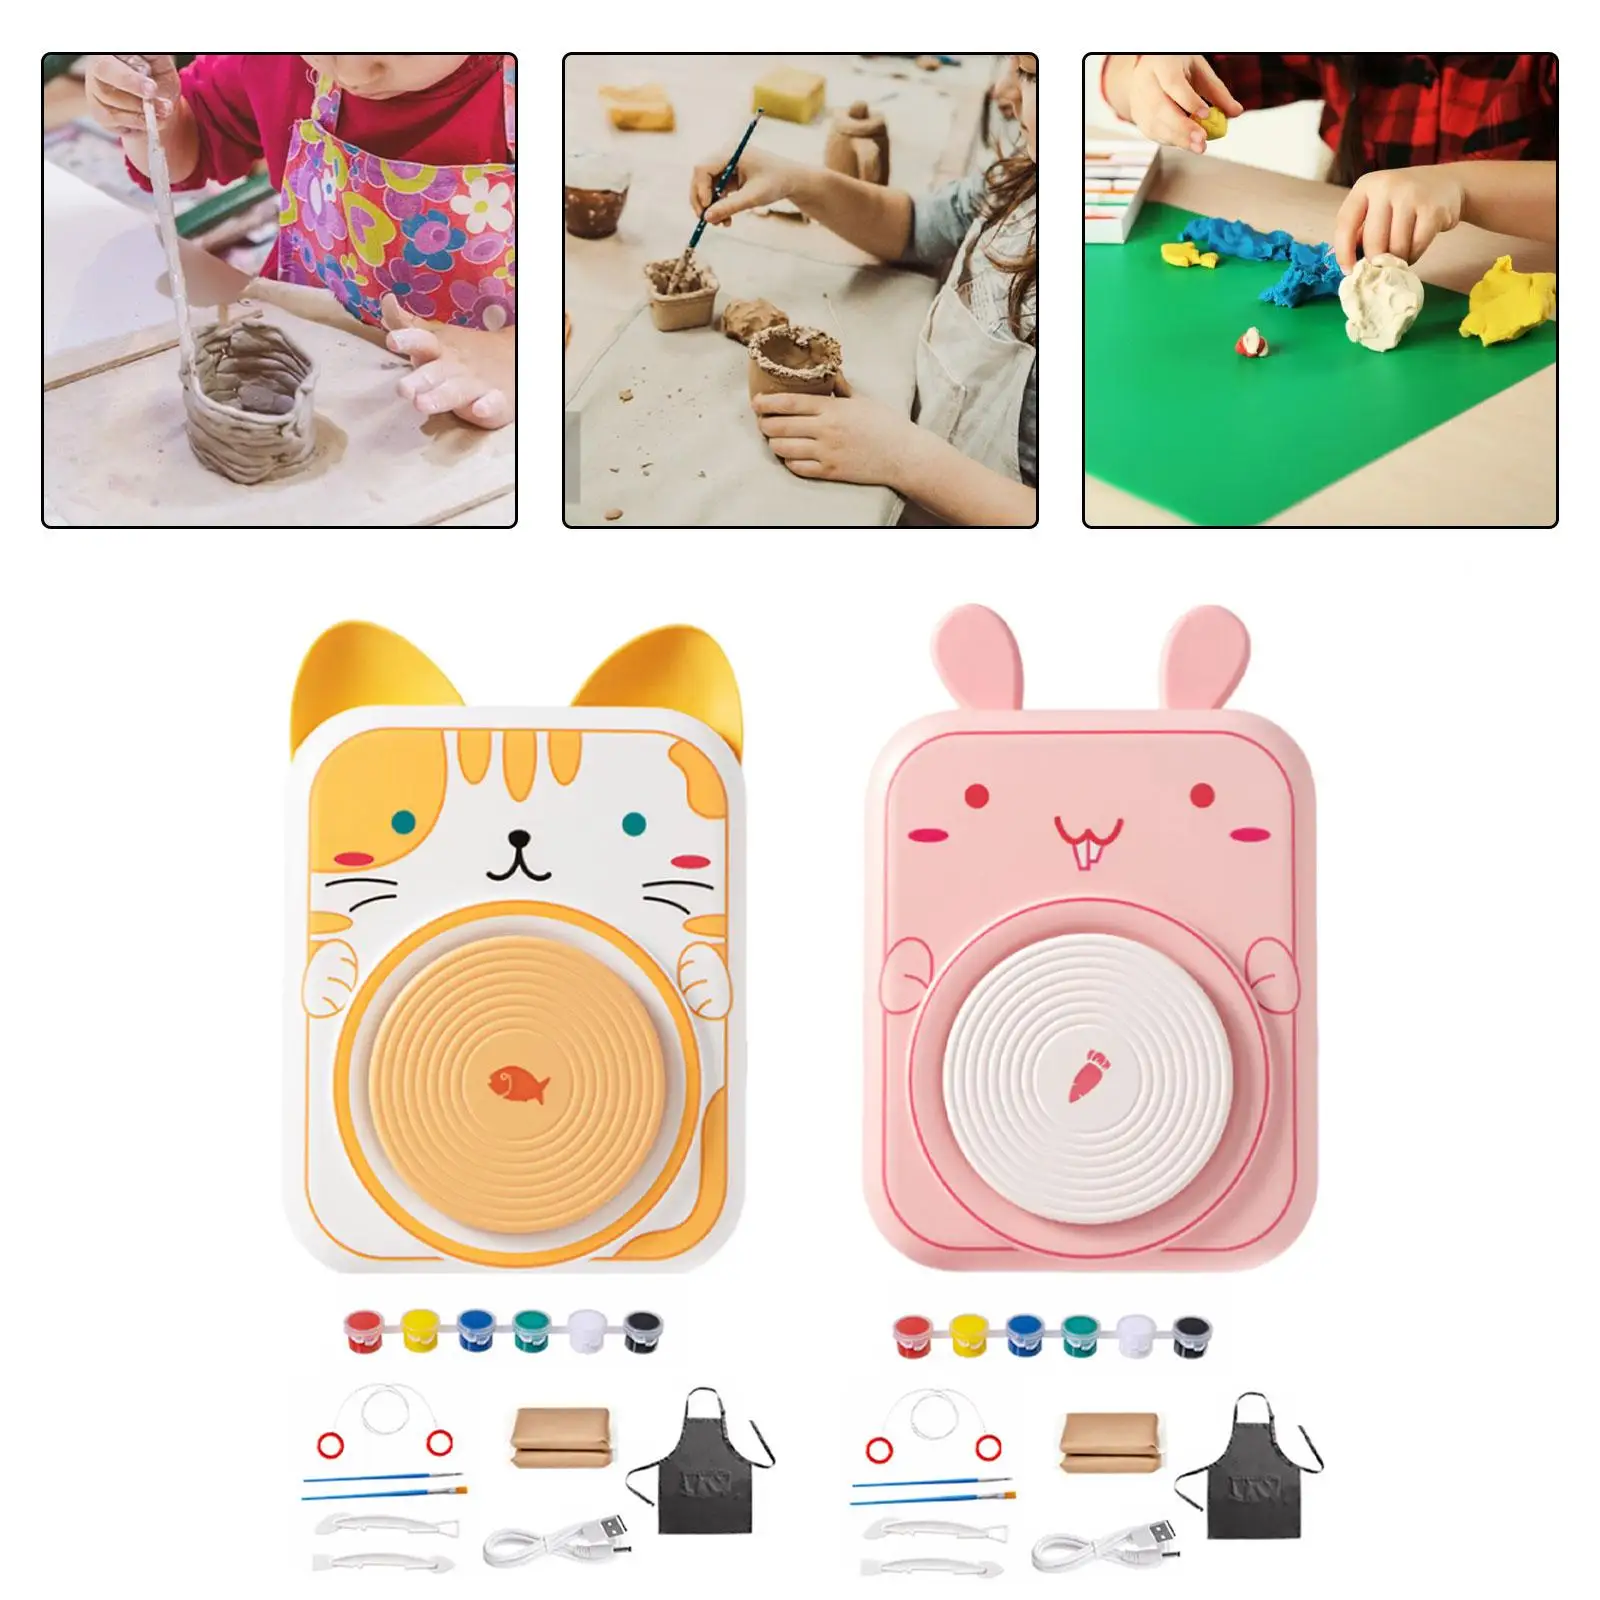 Electric Pottery Wheel for Working Forming Children DIY Art Craft